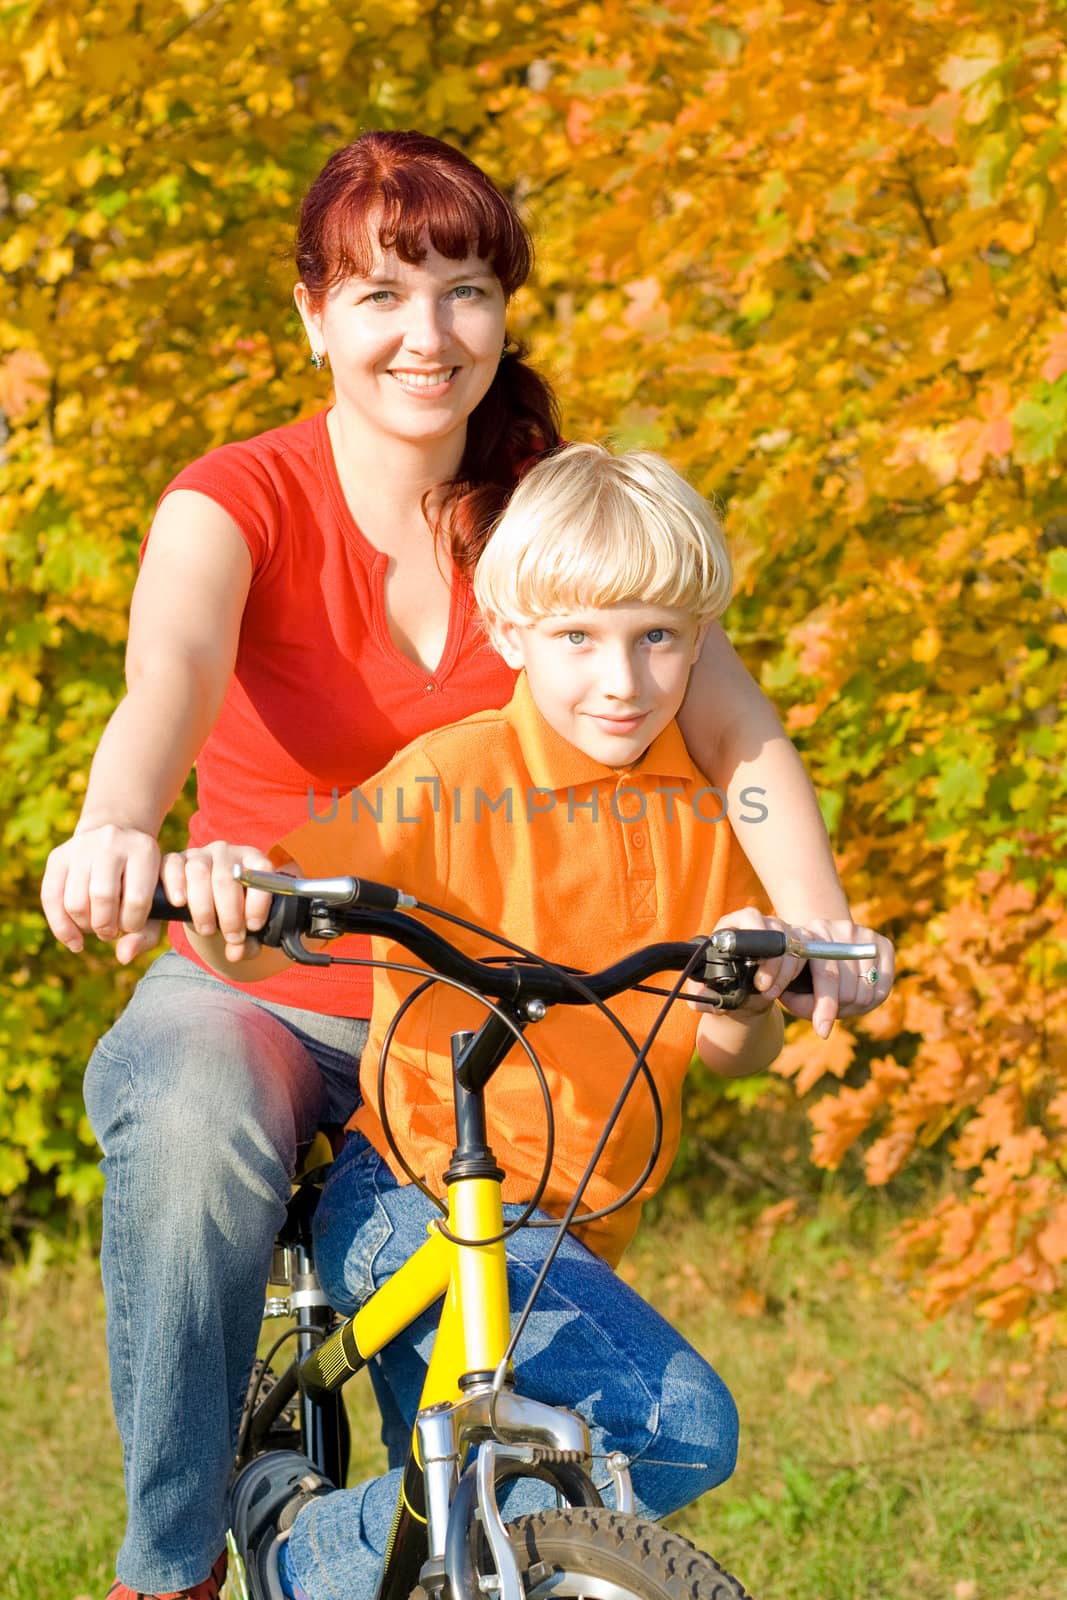 Young happy women and son on bicycle in the fall